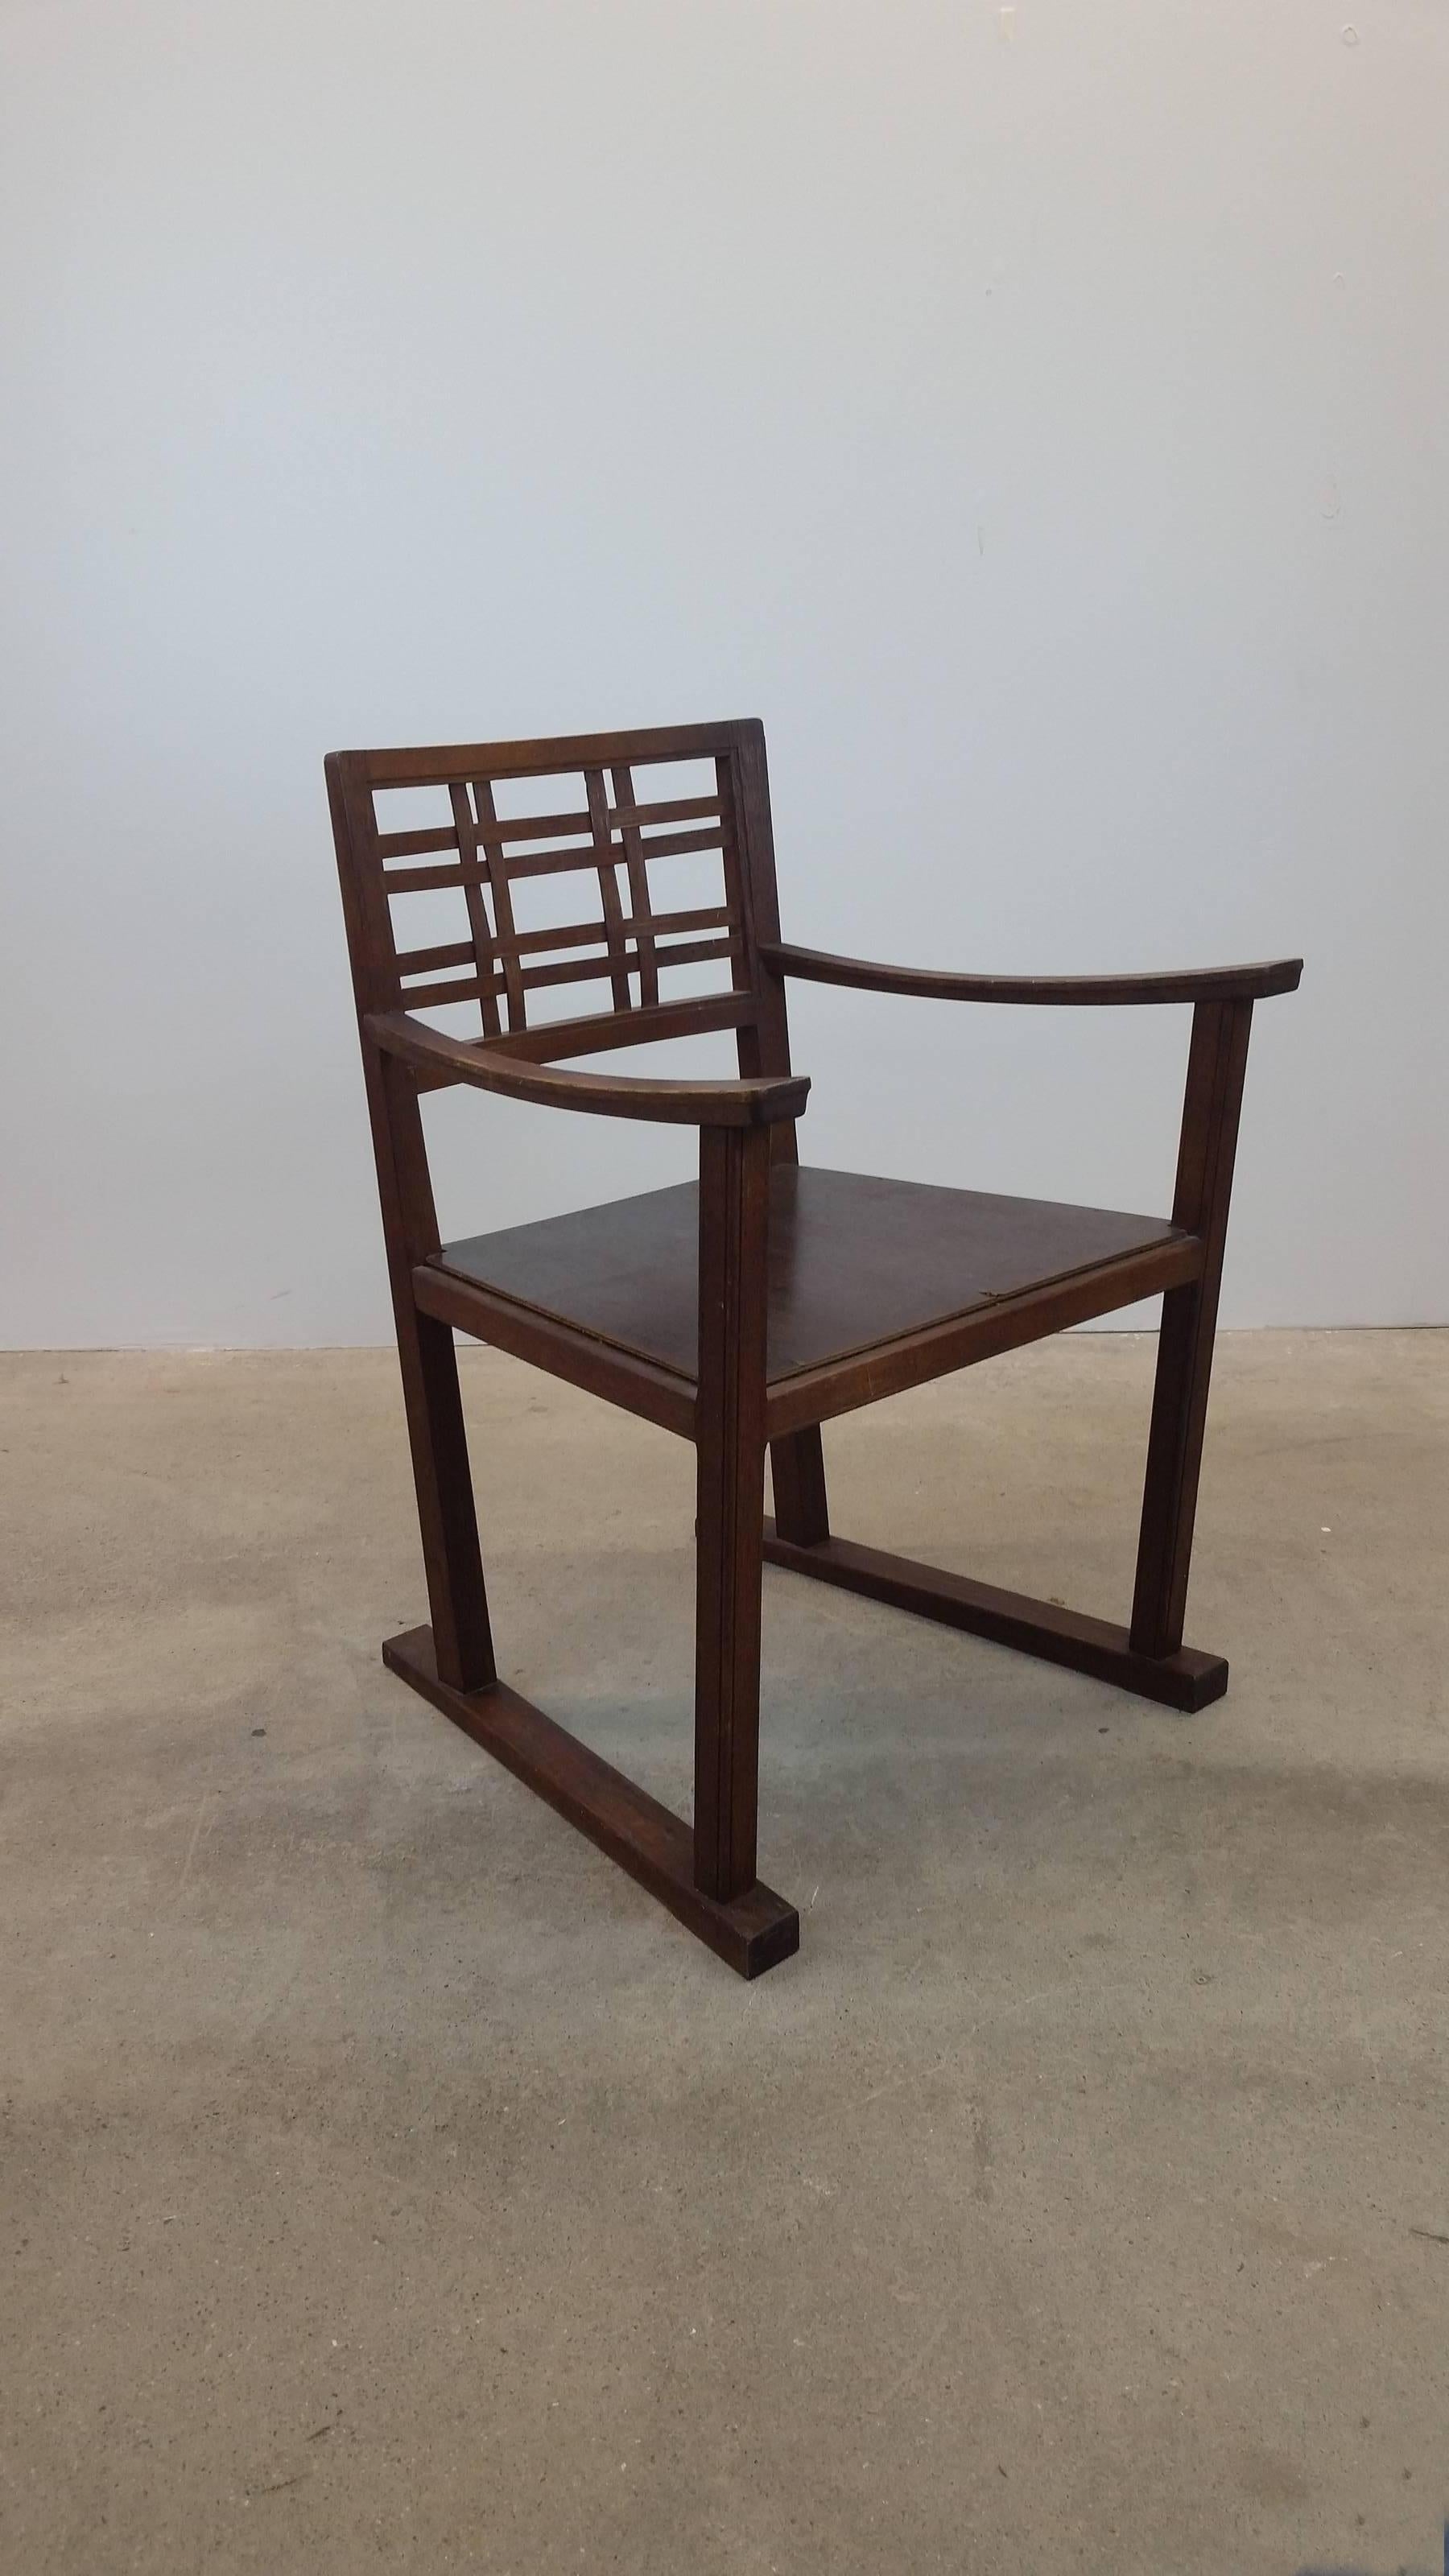 Scottish Art and Crafts chair, circa 1910. Clear Japanese influence noticeable, particularly in the arms. Constructed entirely of white oak. A beautifully designed and constructed chair. Seat will require a cushion.